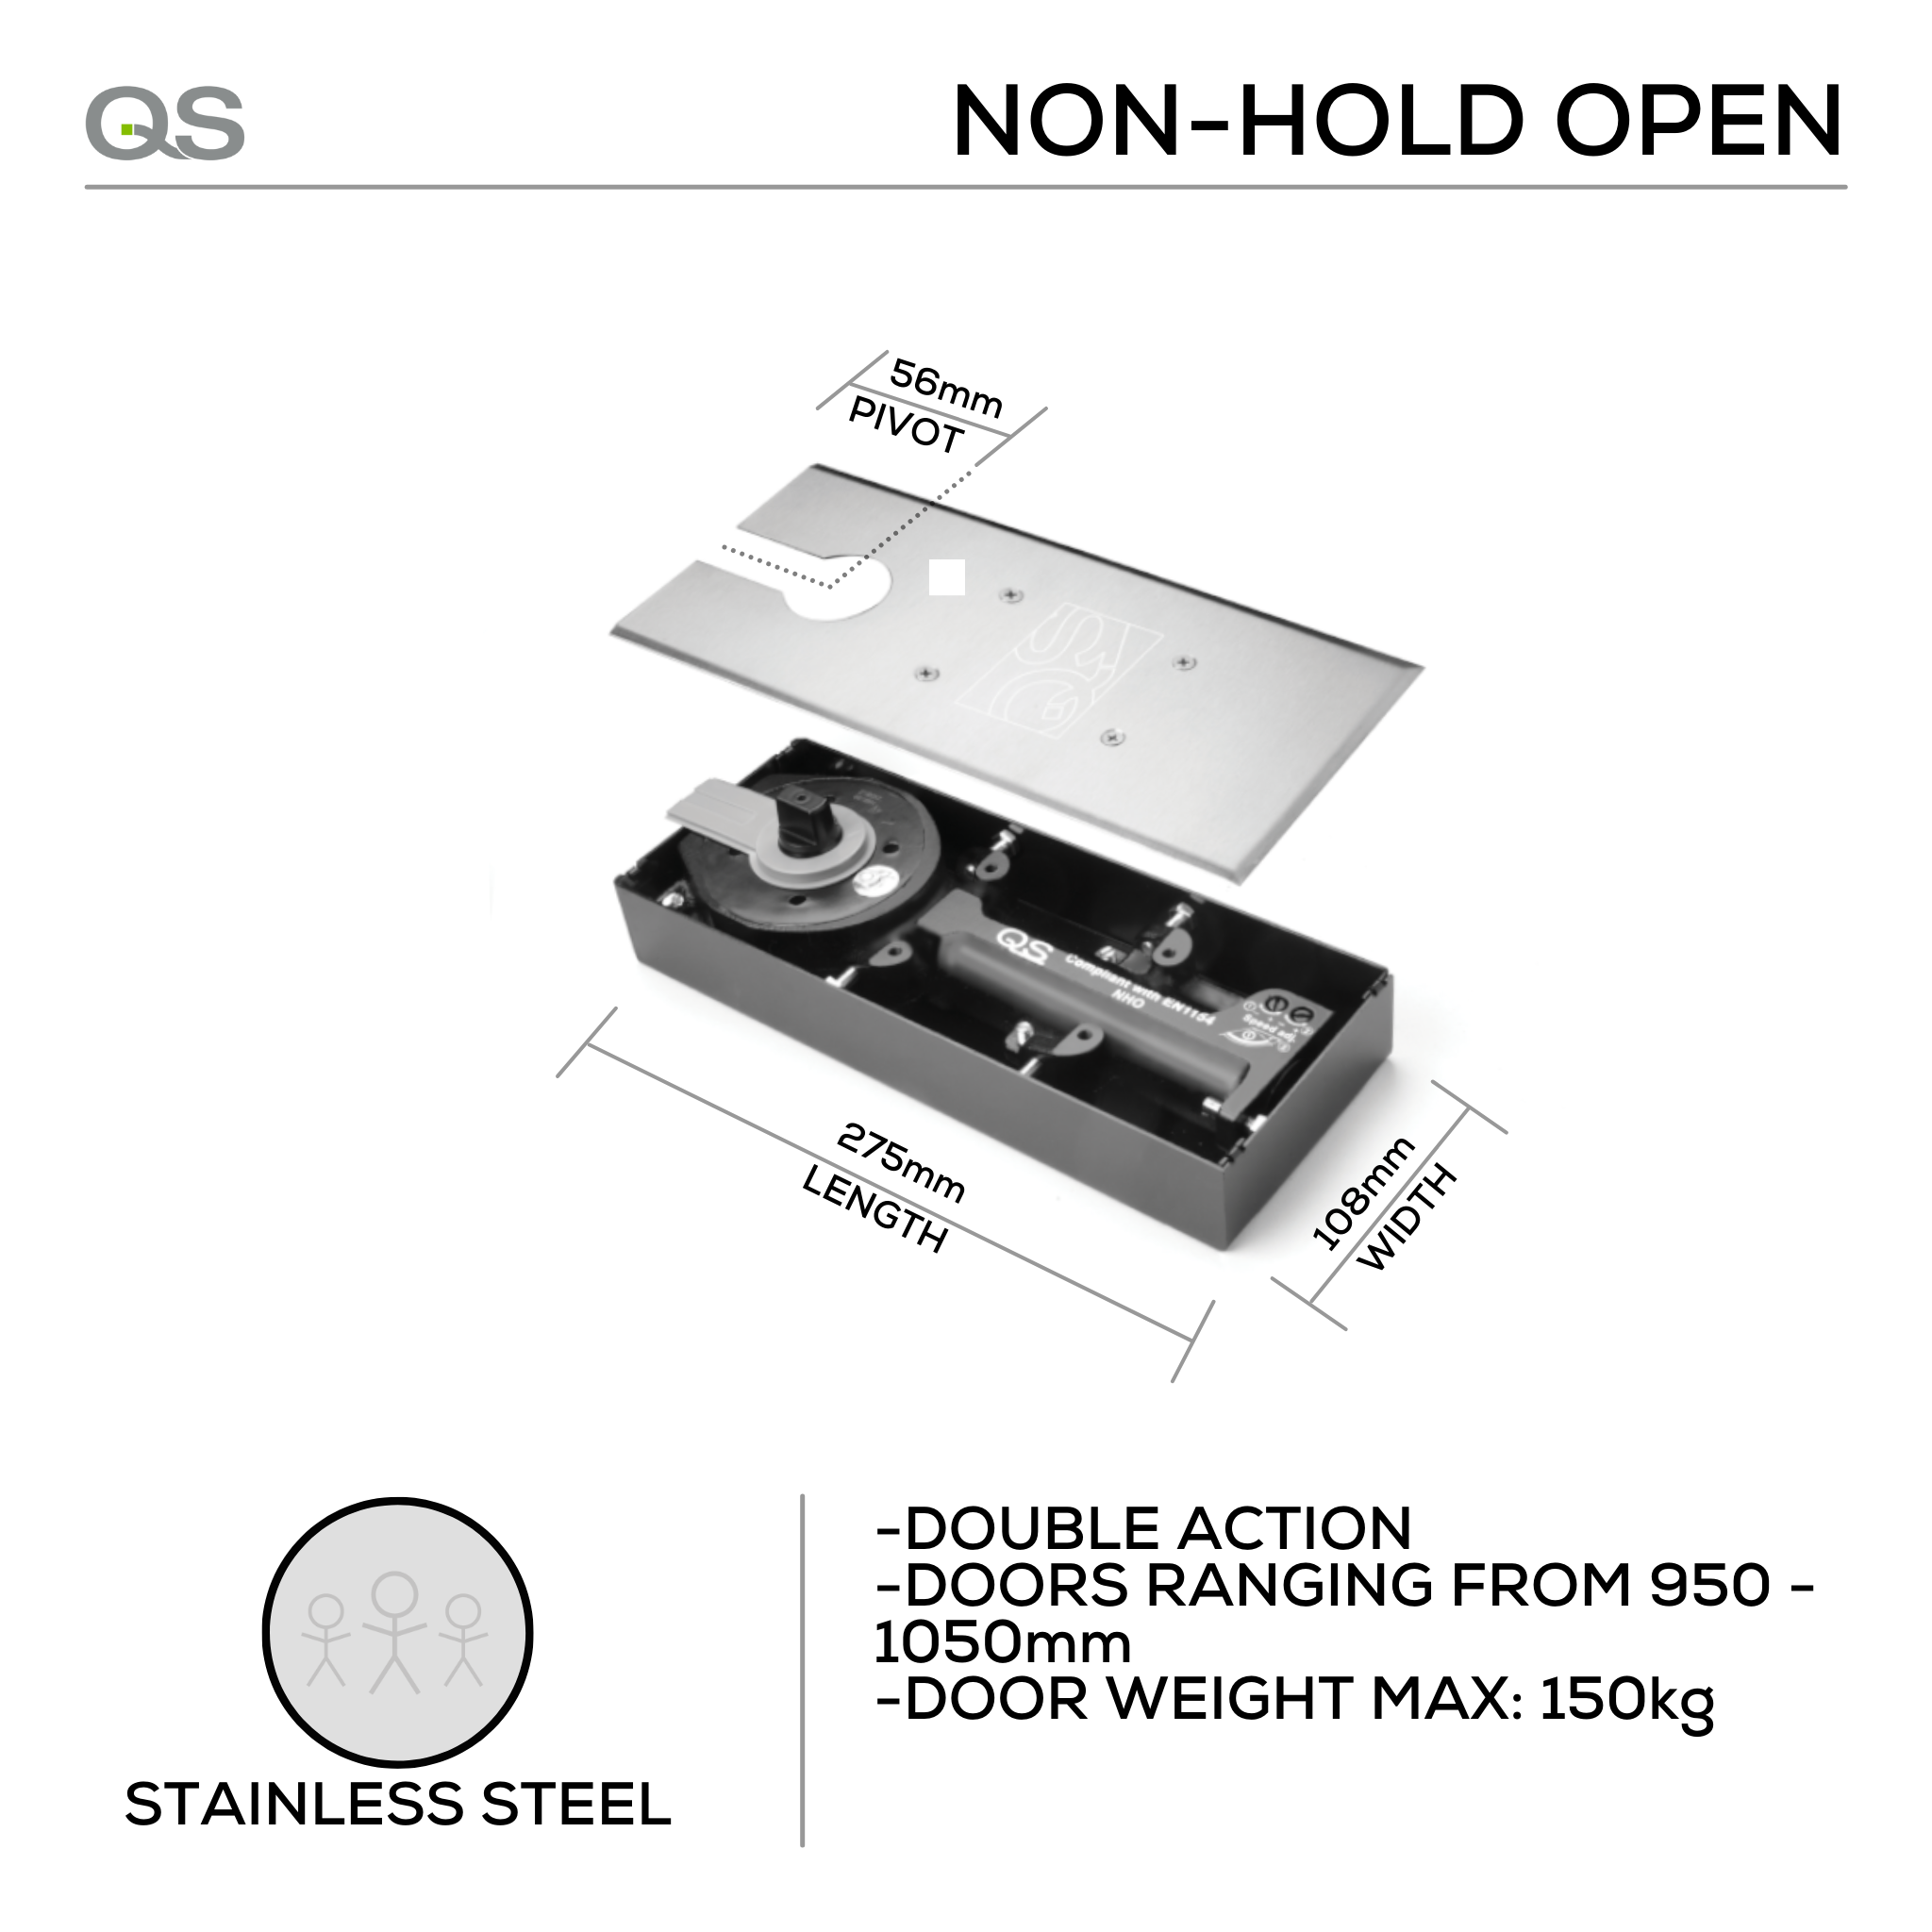 QS880/4 NHO, Floorspring, Double Action, Non-Hold Open, 150mm (kg), 4, Top Centre, Bottom Strap, Stainless Steel, QS